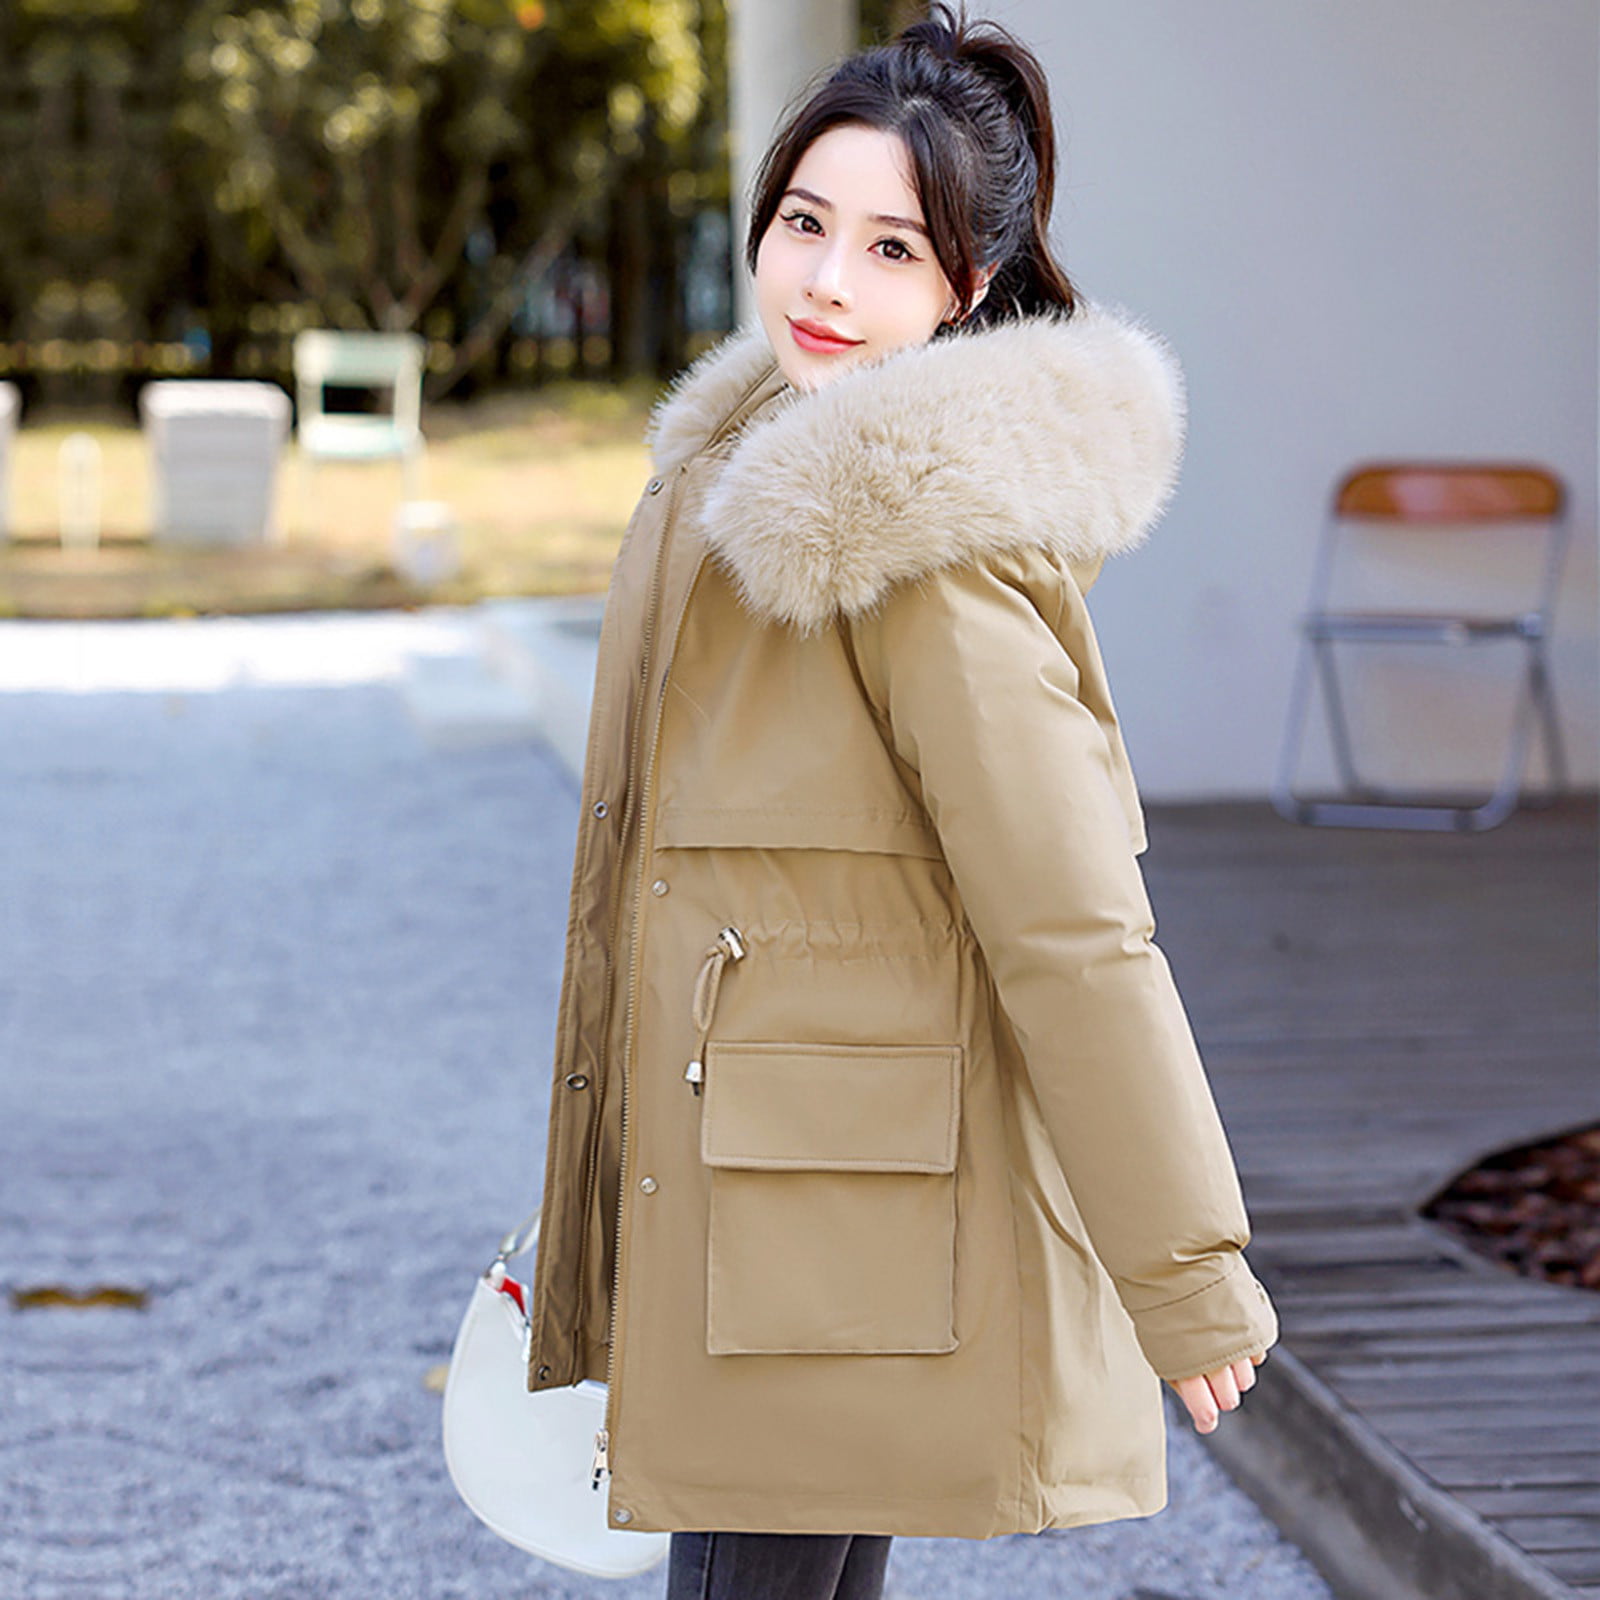 Thick And Warm Down Ankle Length Coat Jacket With Fur Coat Autumn/Winter  Collection From Luo04, $34.23